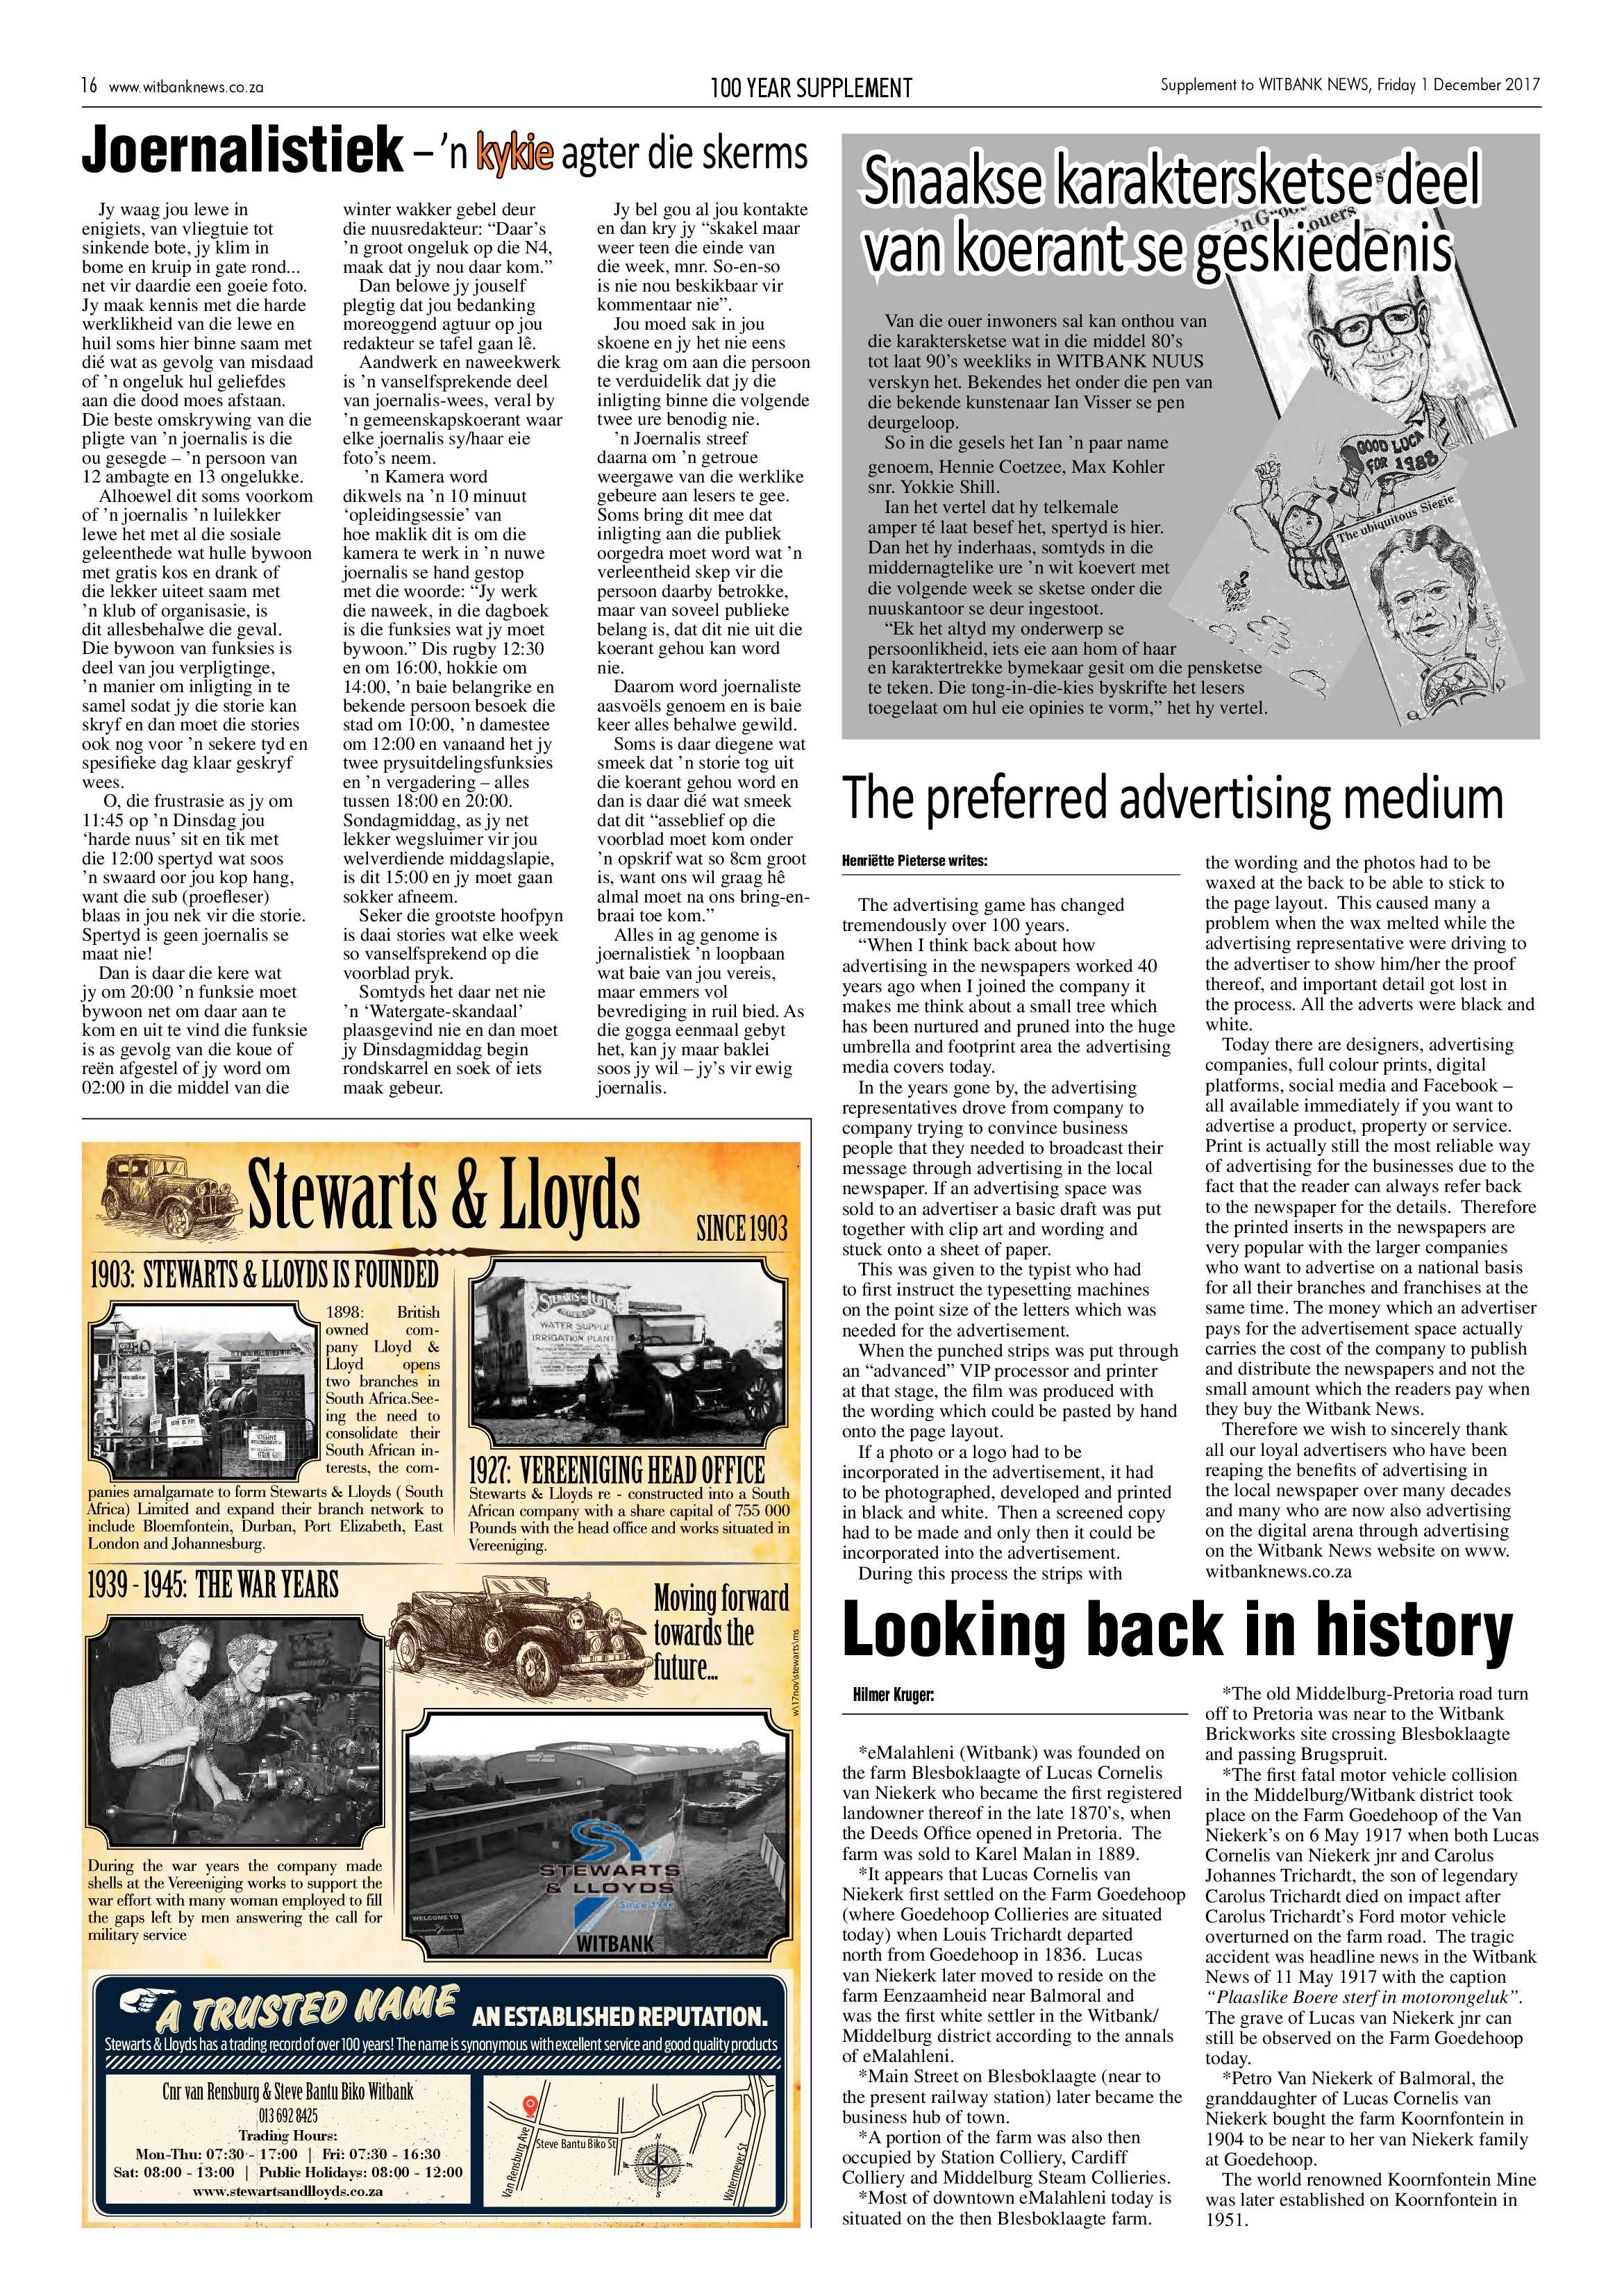 Witbank News 100 Year Supplement page 16